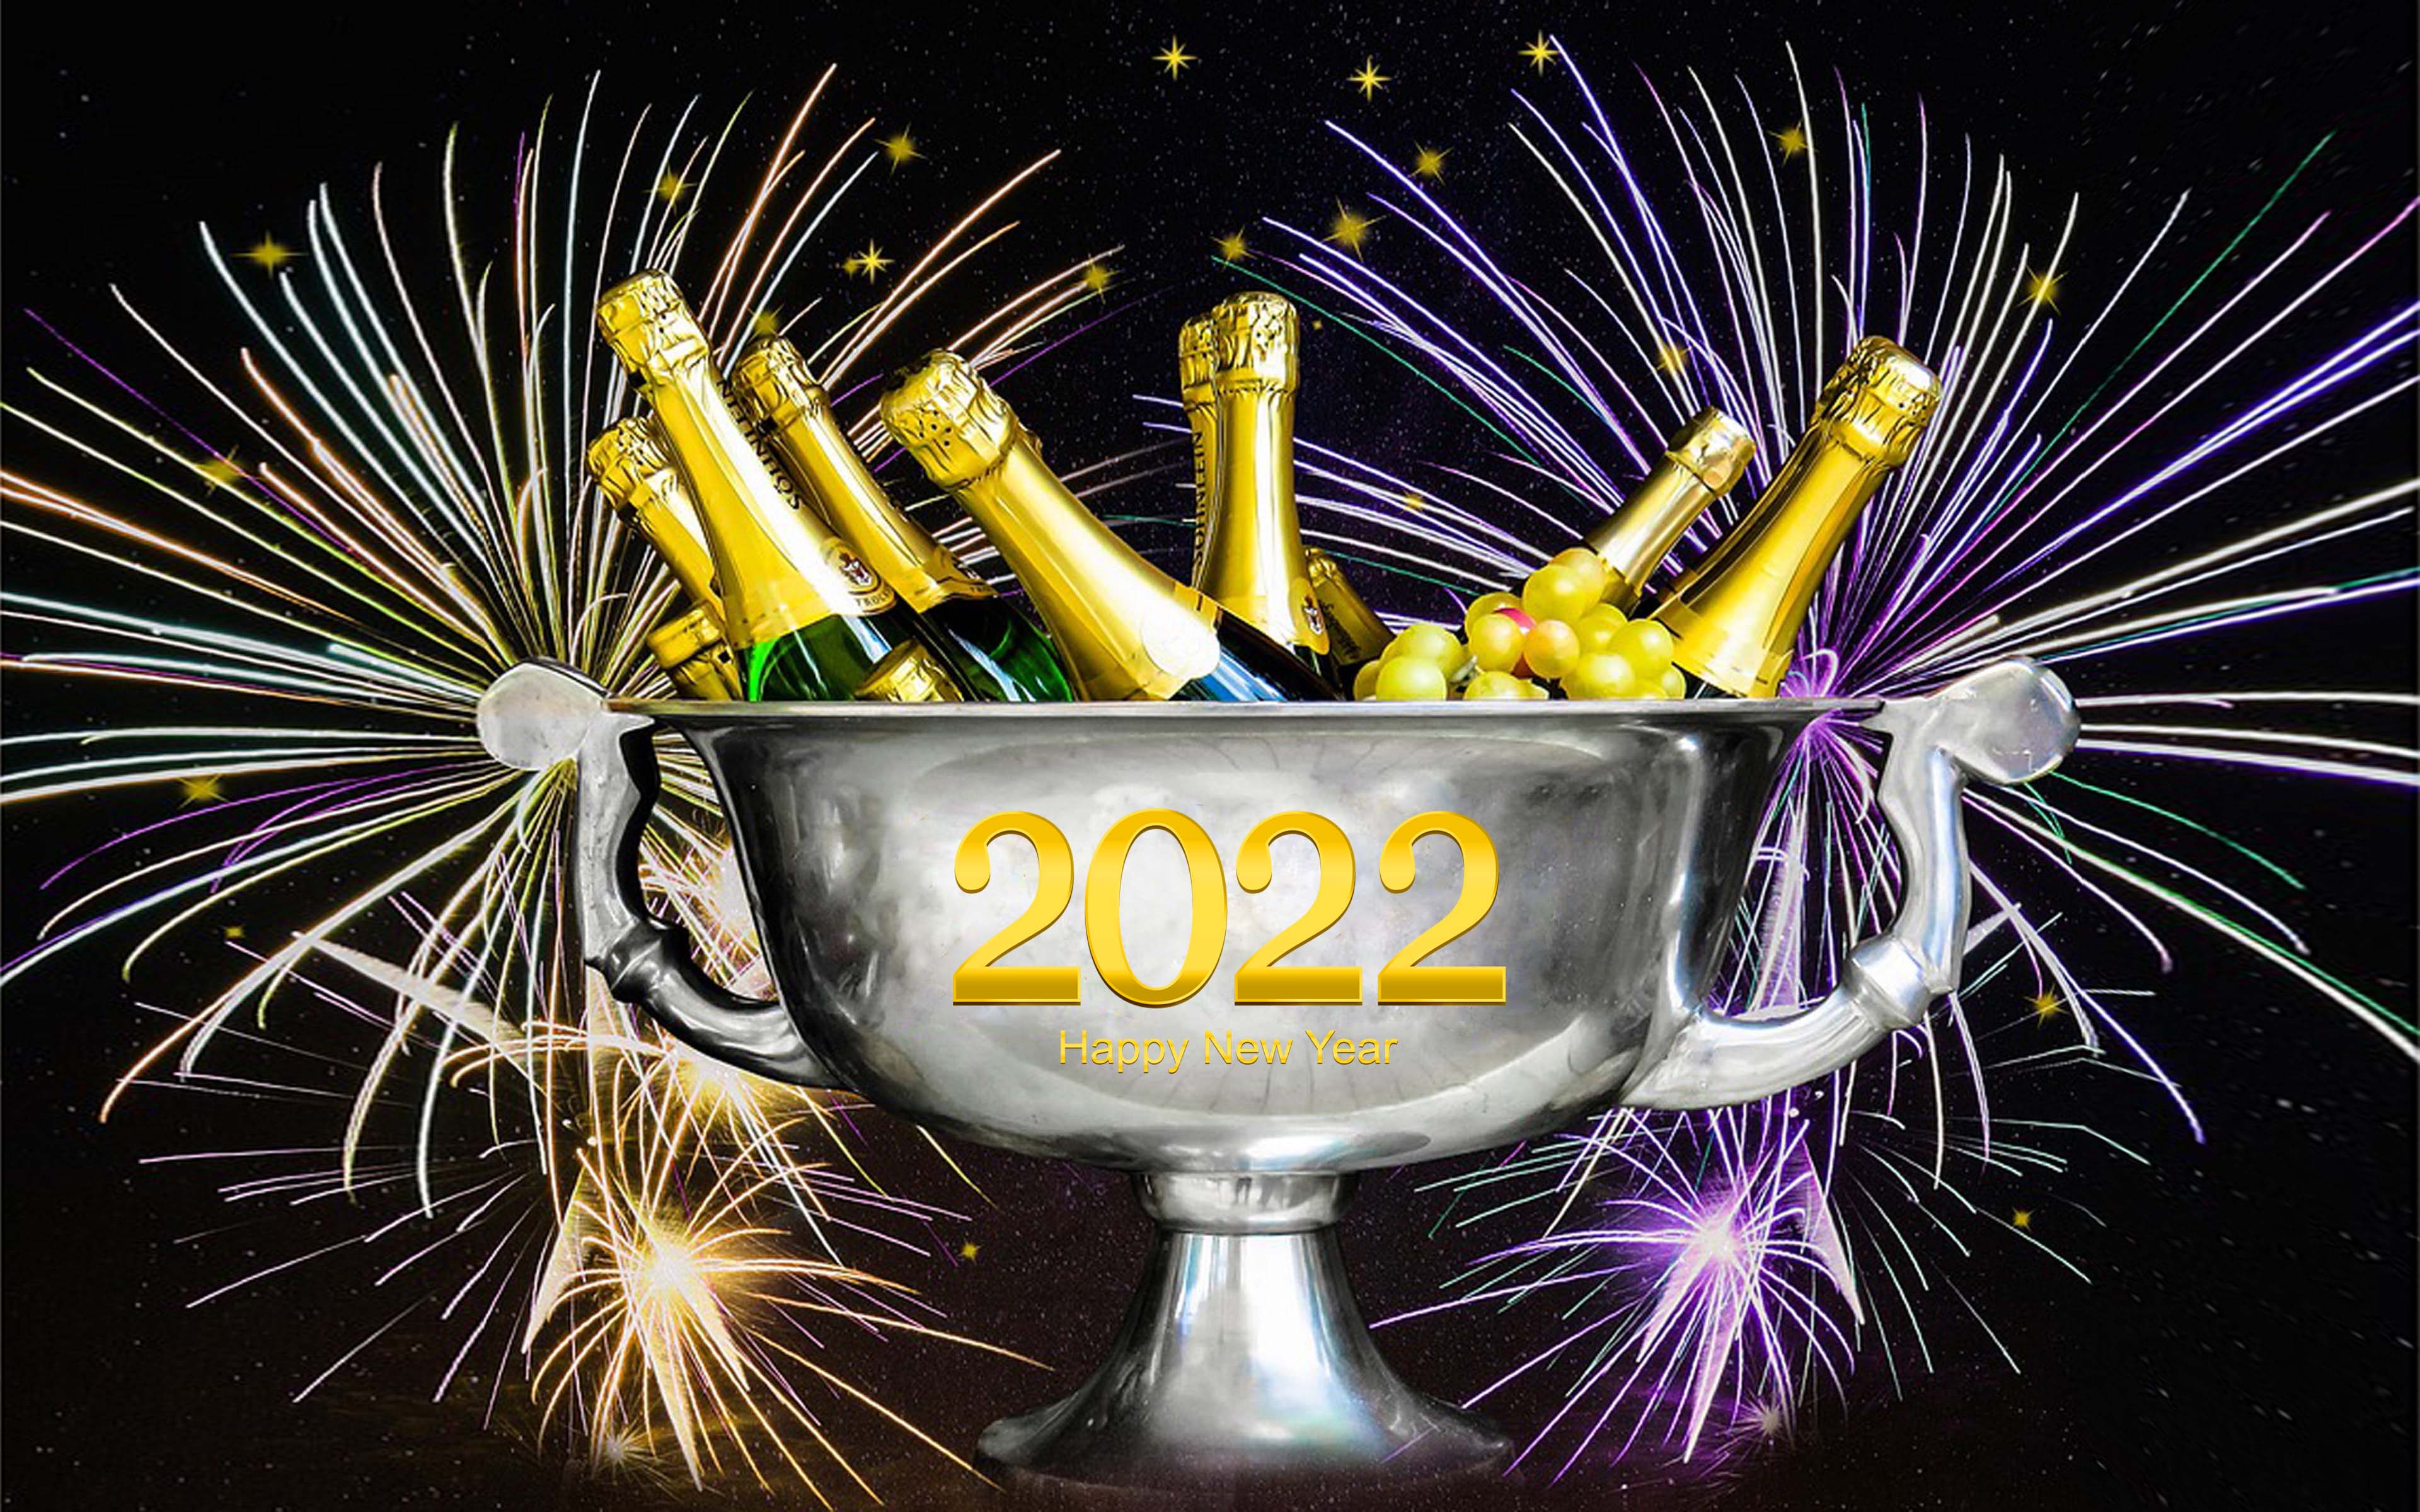 Merry Christmas & Happy New Year 2022 New Year's Eve Champagne Bottles In Gold Foil Fireworks, Wallpaper13.com